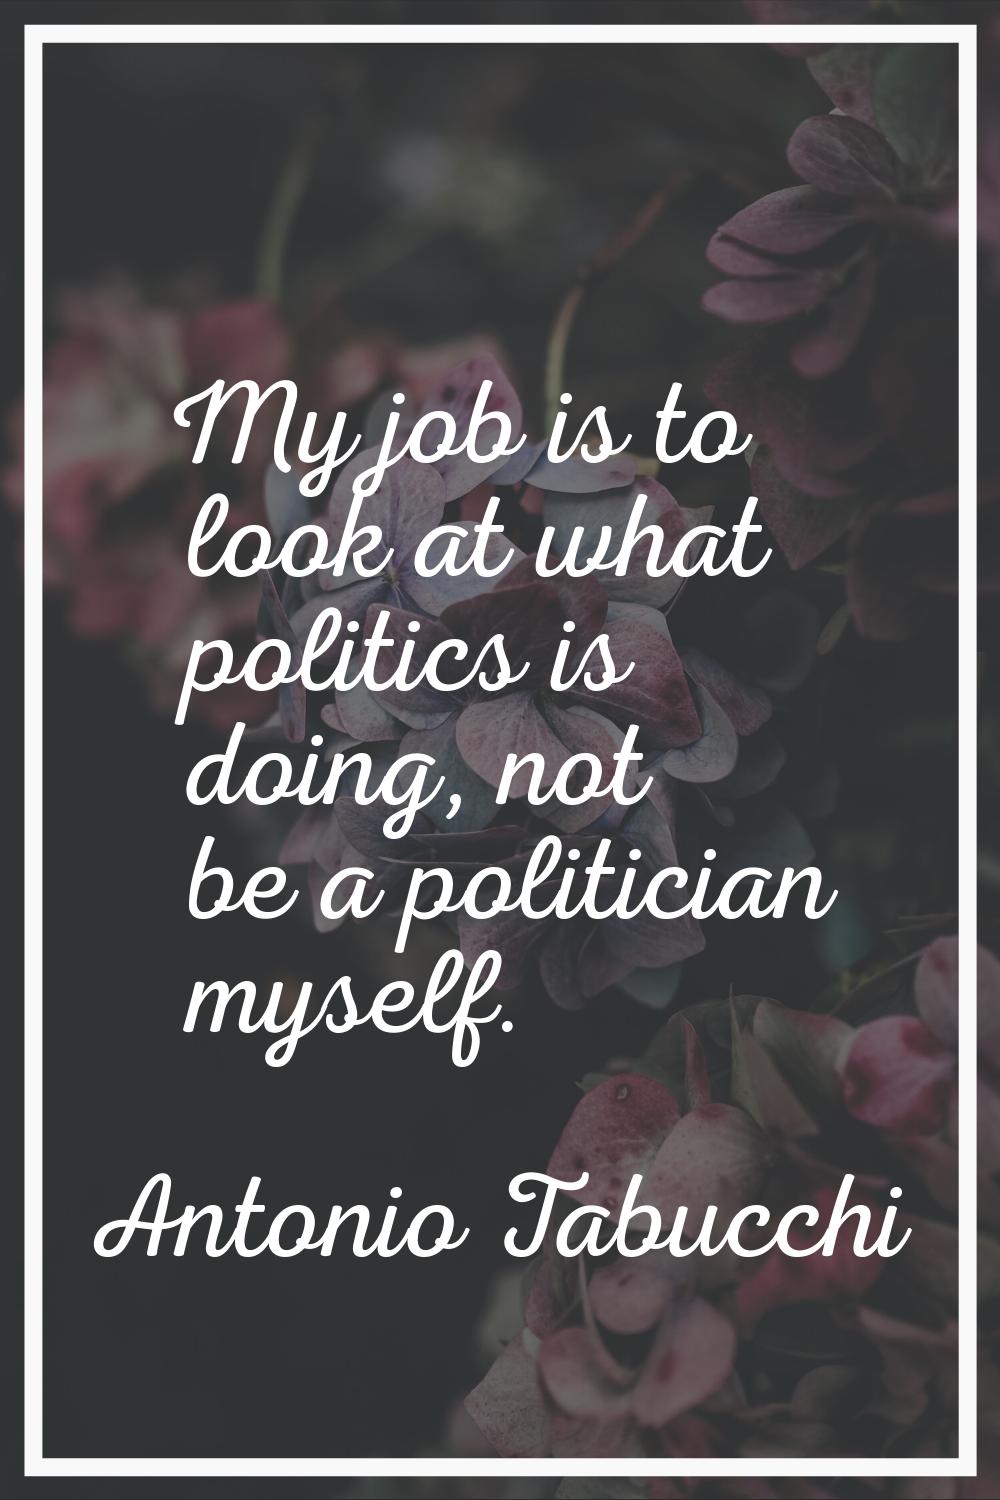 My job is to look at what politics is doing, not be a politician myself.